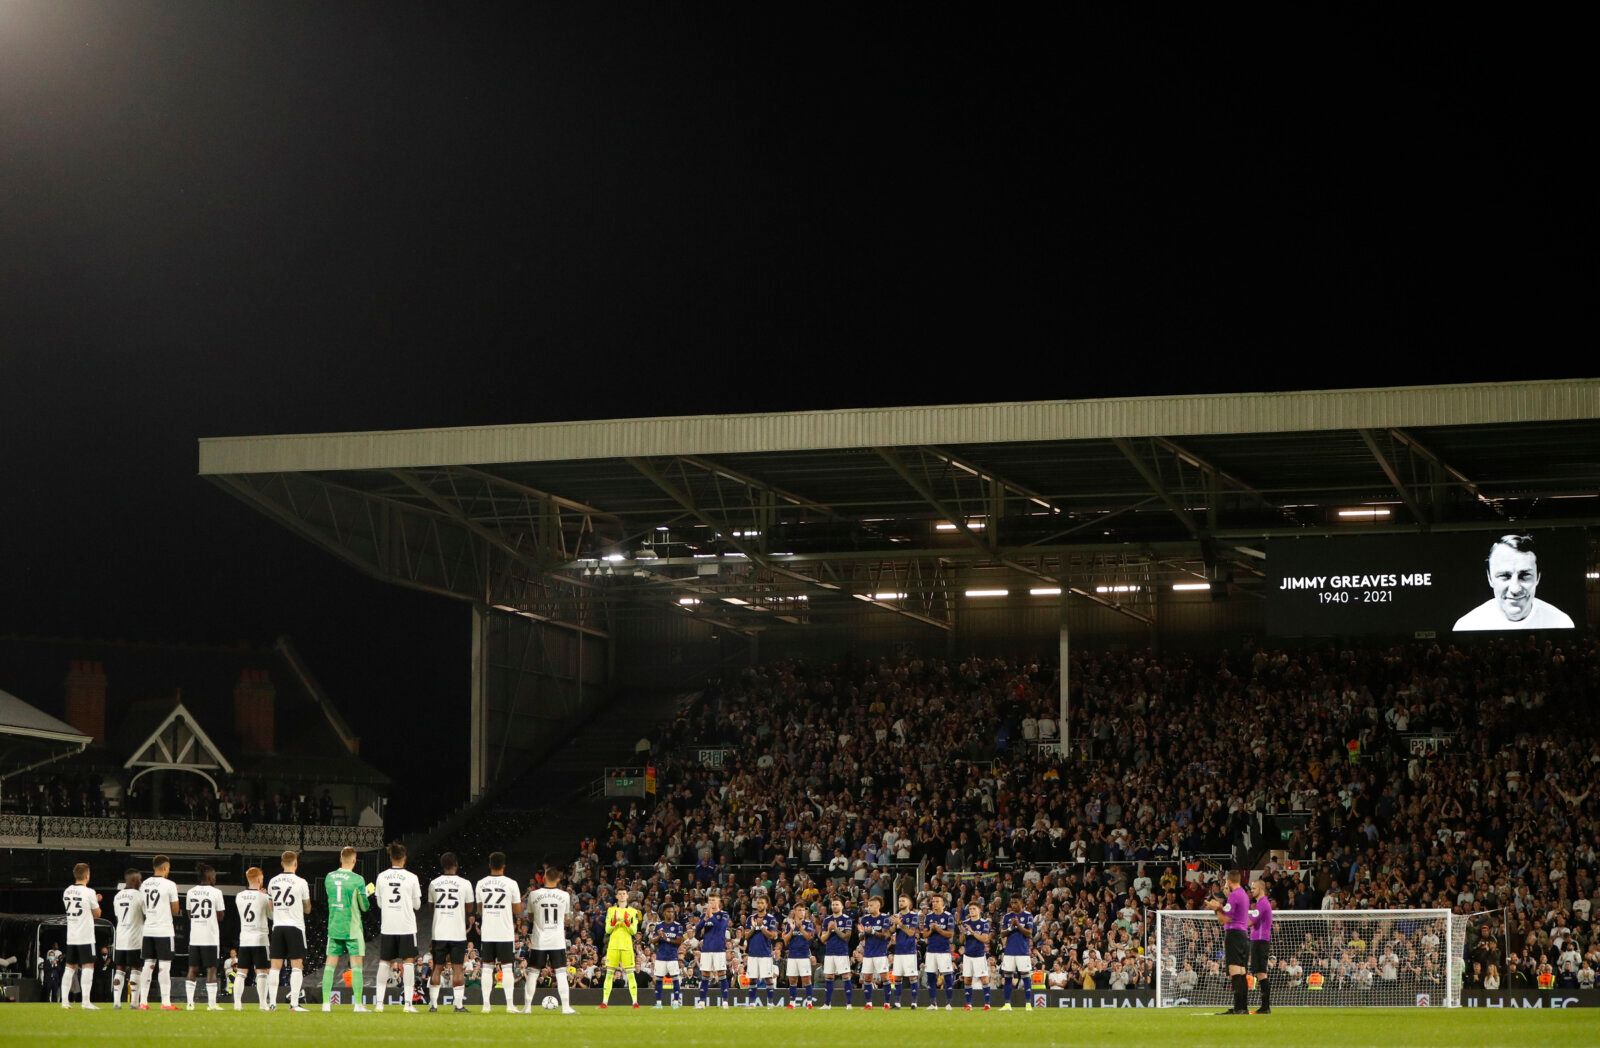 Soccer Football - Carabao Cup - Third Round - Fulham v Leeds United - Craven Cottage, London, Britain - September 21, 2021 General view of players during a minutes applause in tribute of Jimmy Greaves before the match Action Images via Reuters/John Sibley EDITORIAL USE ONLY. No use with unauthorized audio, video, data, fixture lists, club/league logos or 'live' services. Online in-match use limited to 75 images, no video emulation. No use in betting, games or single club /league/player publicati